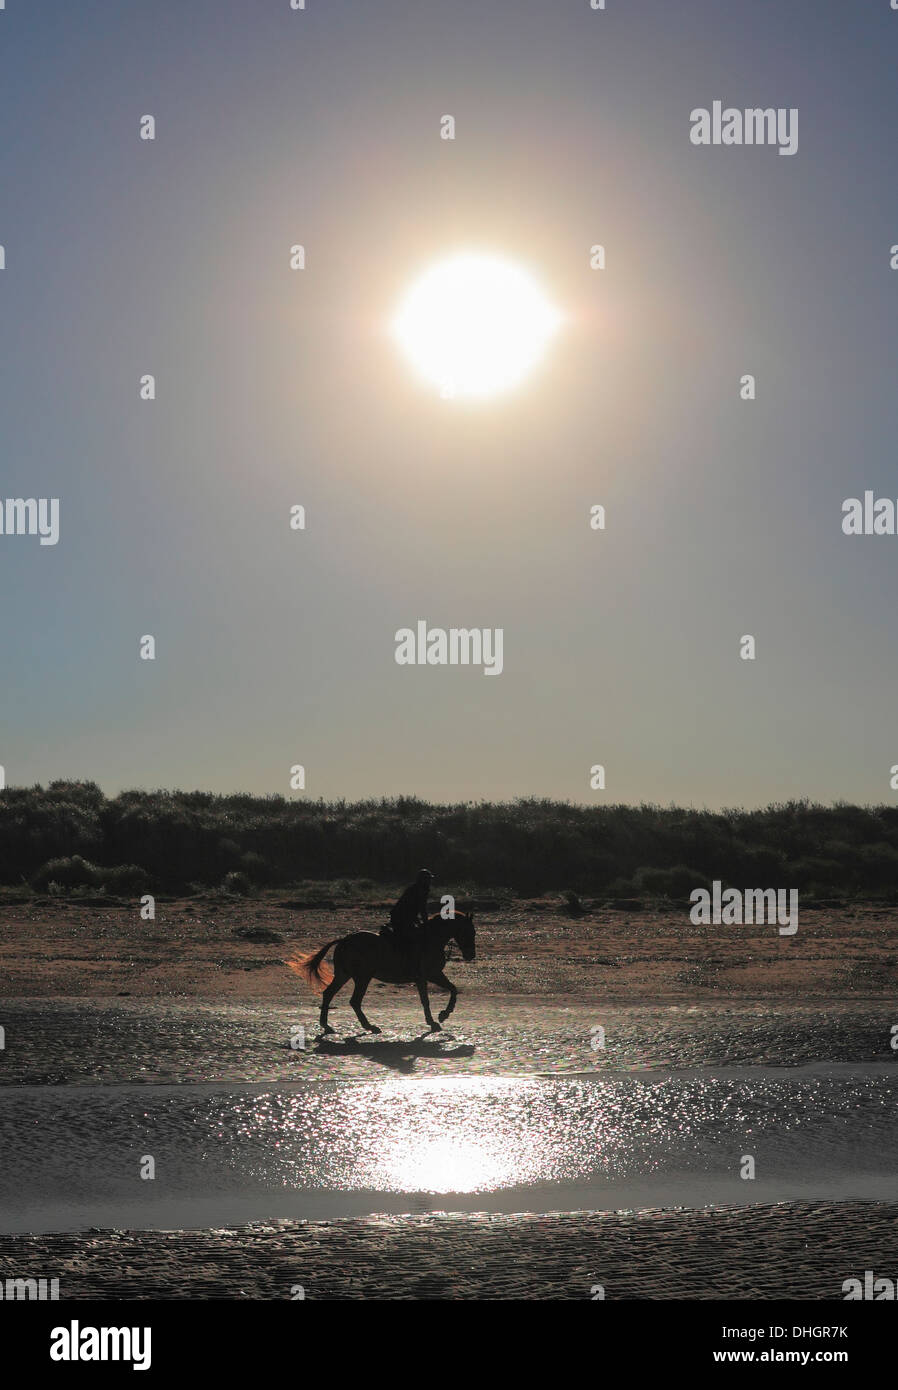 Horse and rider on the beach under a big Winter sun. Stock Photo